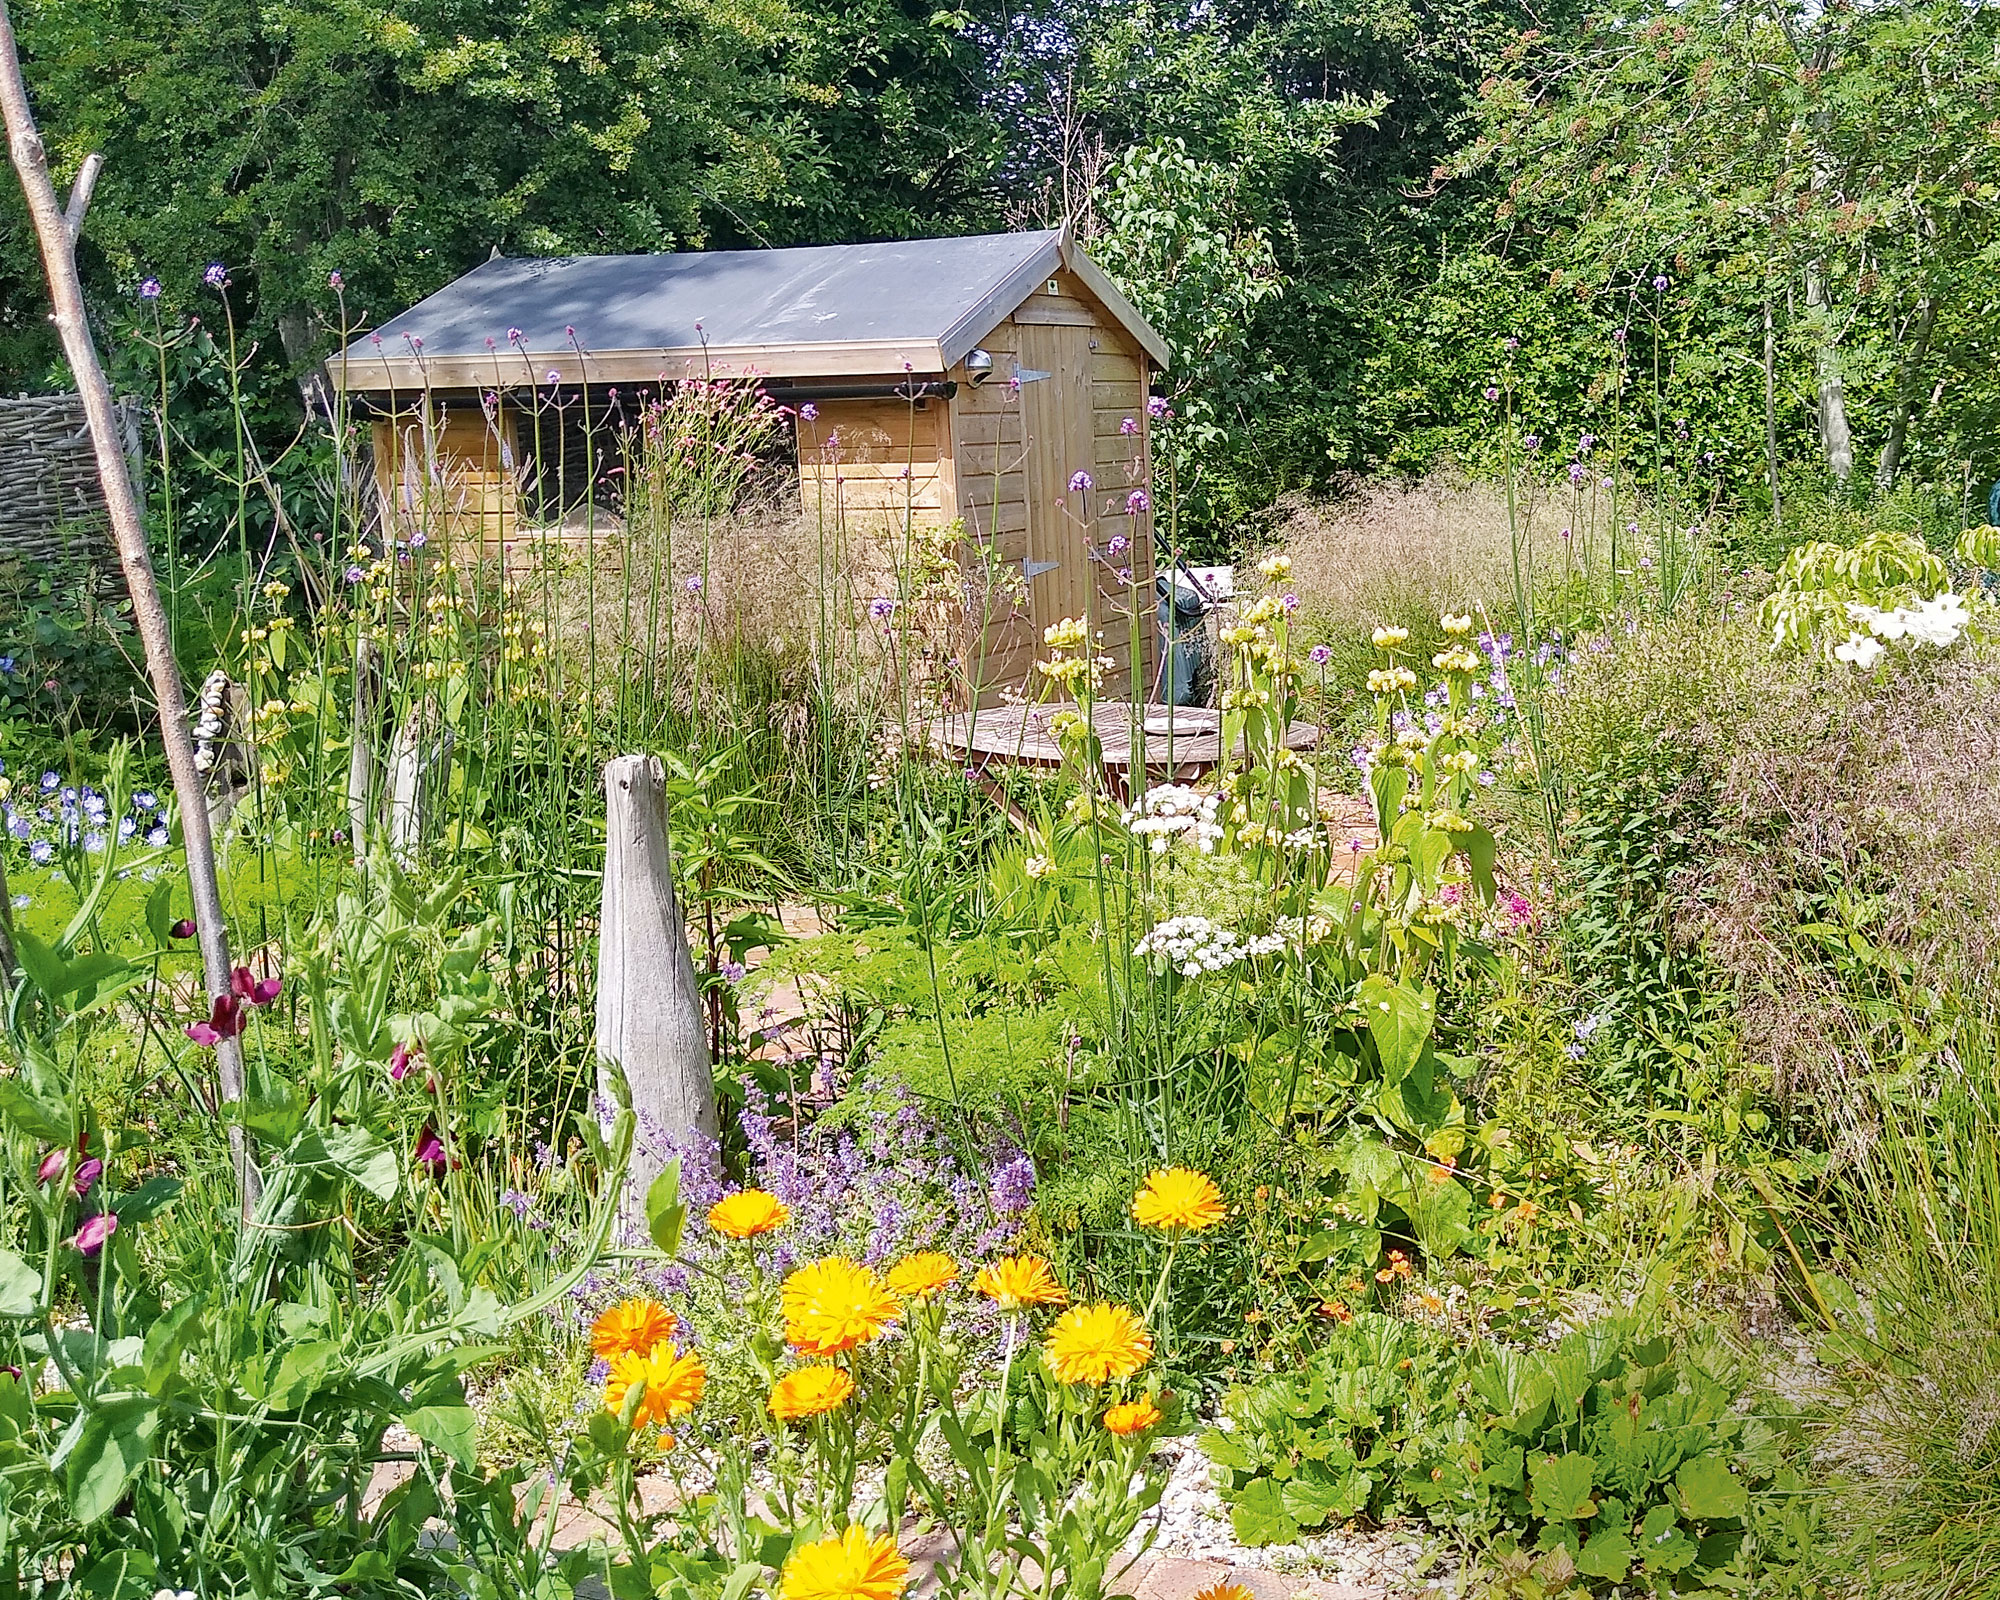 Pretty garden with shed in background, wildflower planting, trees and bushes